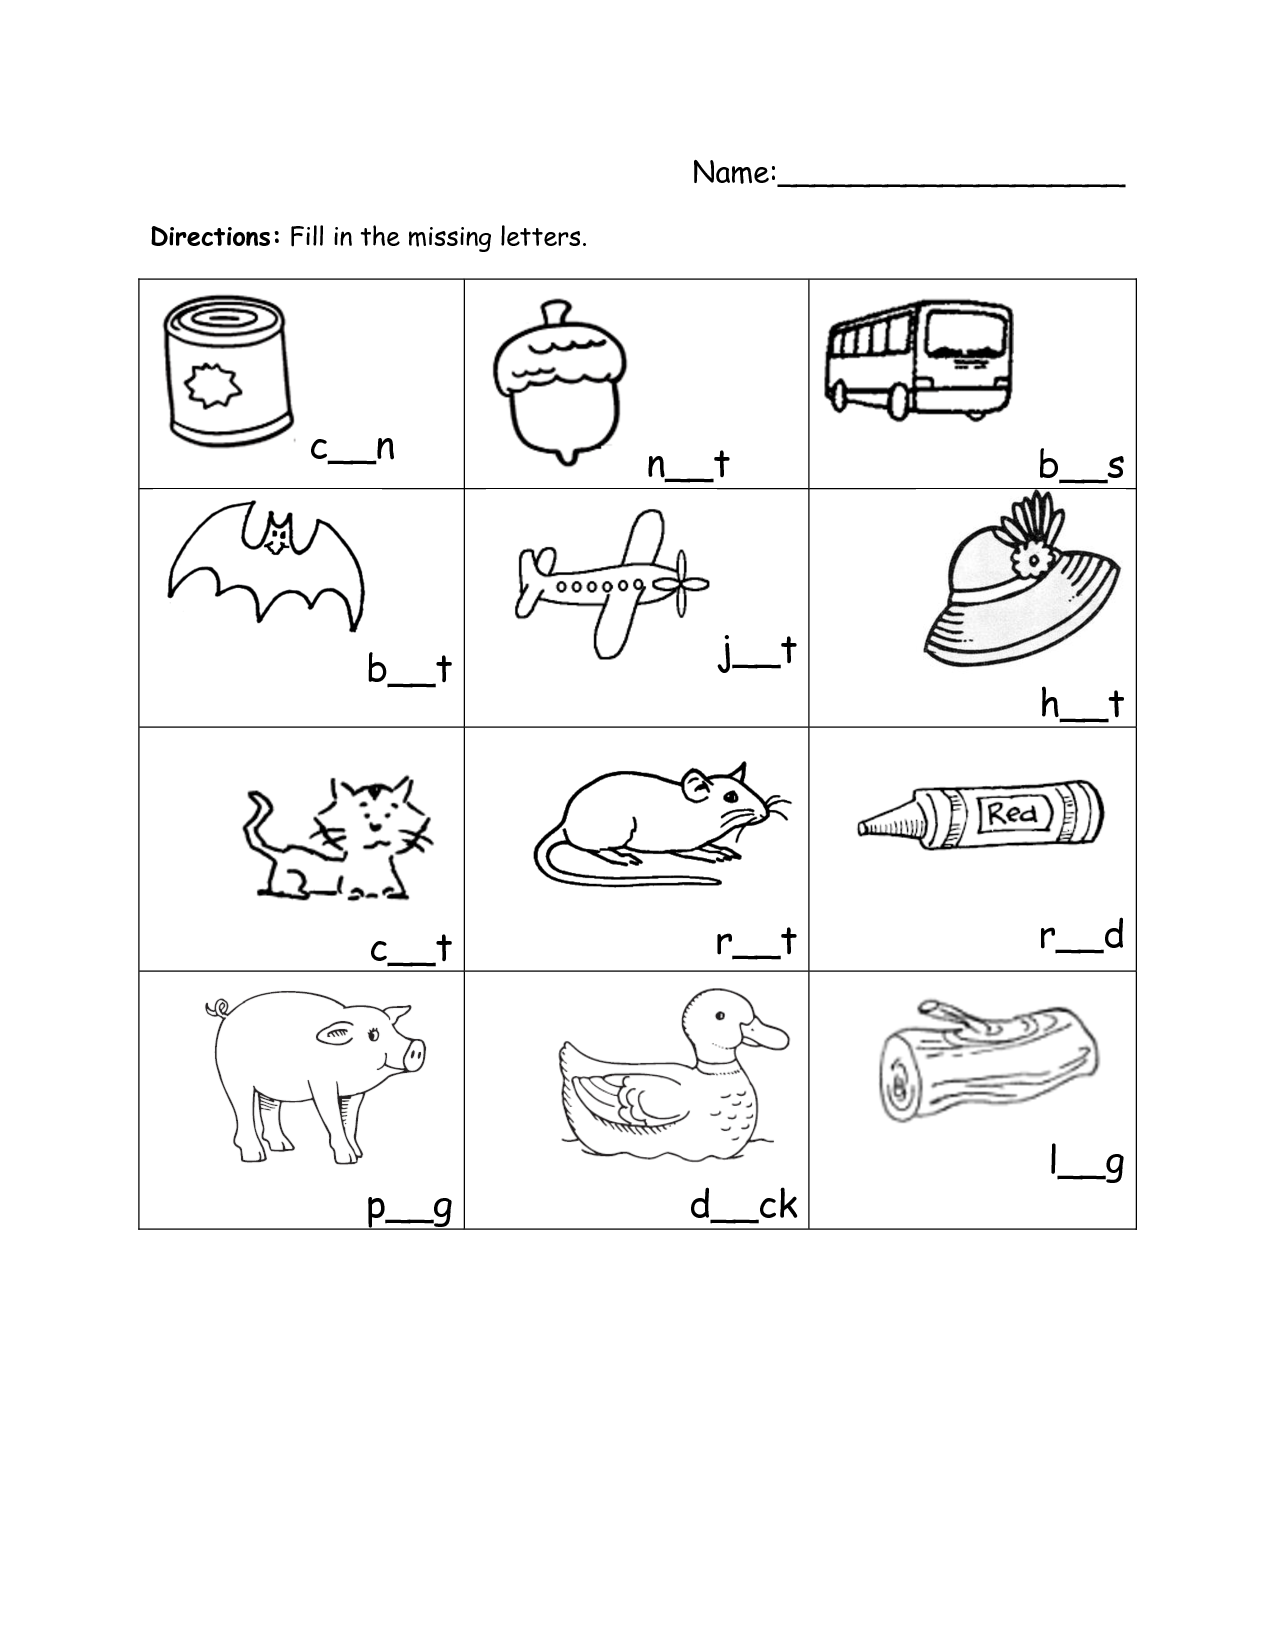 10 Best Images of Fill In Missing Letter Worksheets - Fill in the